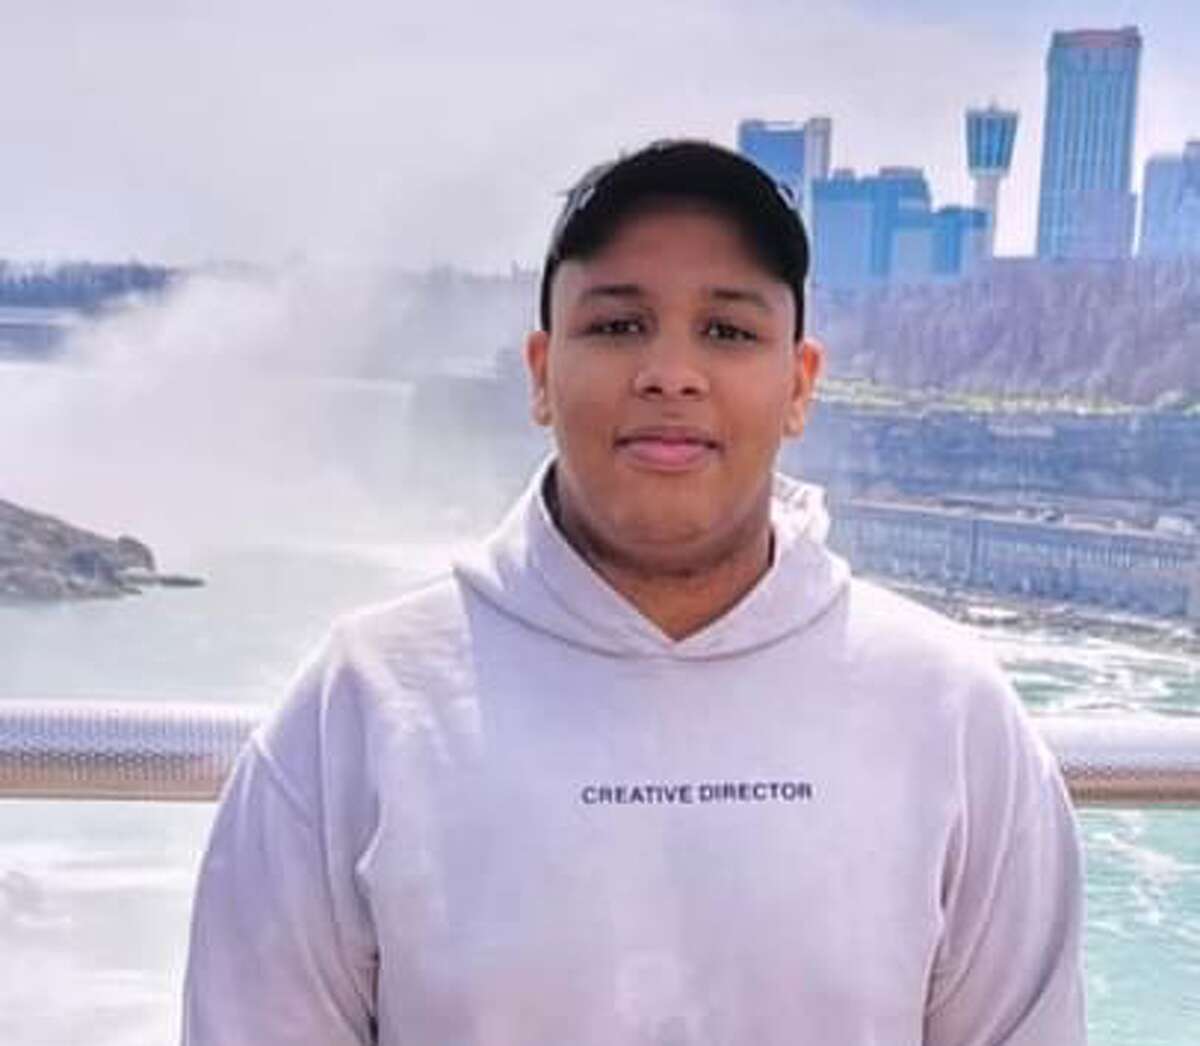 Police have issued a silver alert for 15-year-old Jael Martinez, who has been missing from Bridgeport since Sept. 27, 2022.